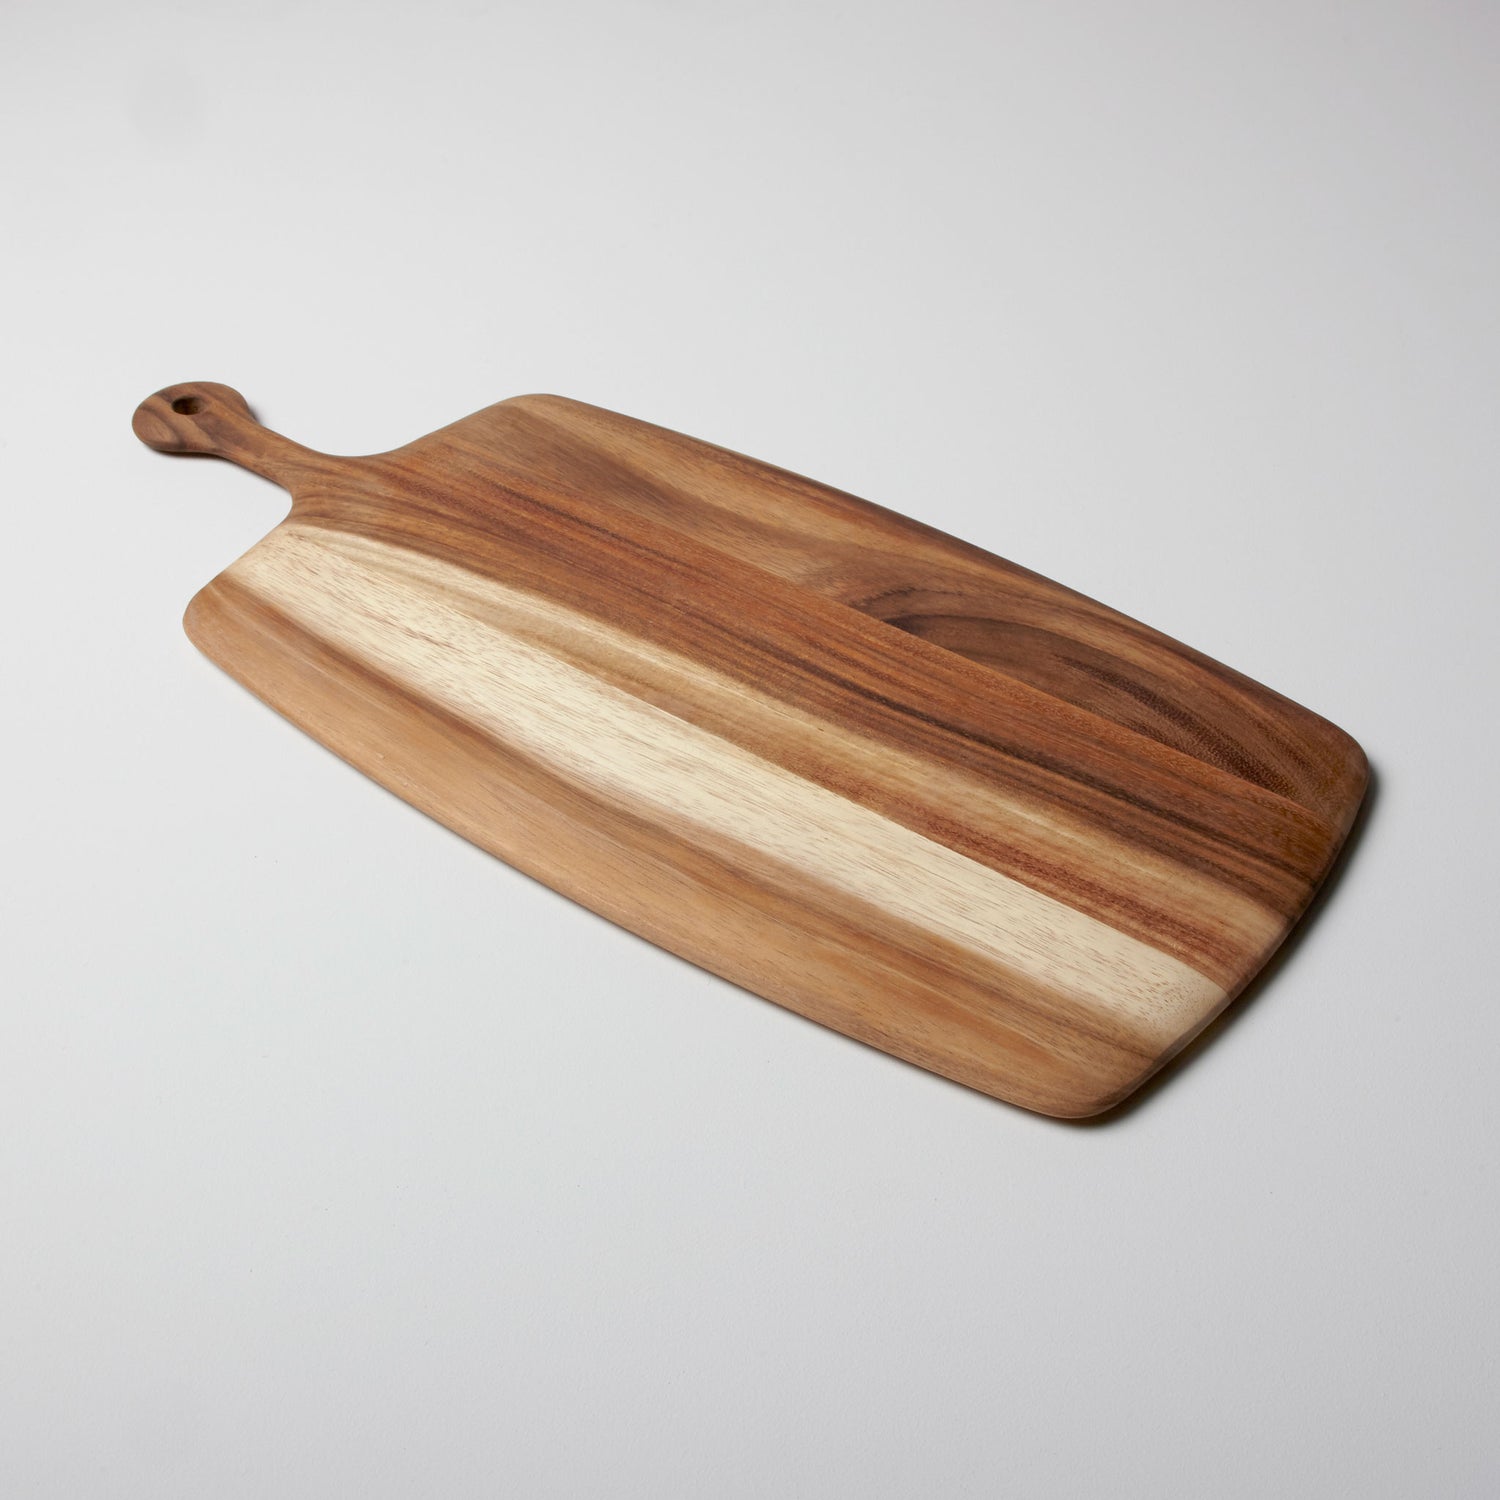 Denmark Acacia Wood Tray Tools for Cooks Artisanal Cutting Board